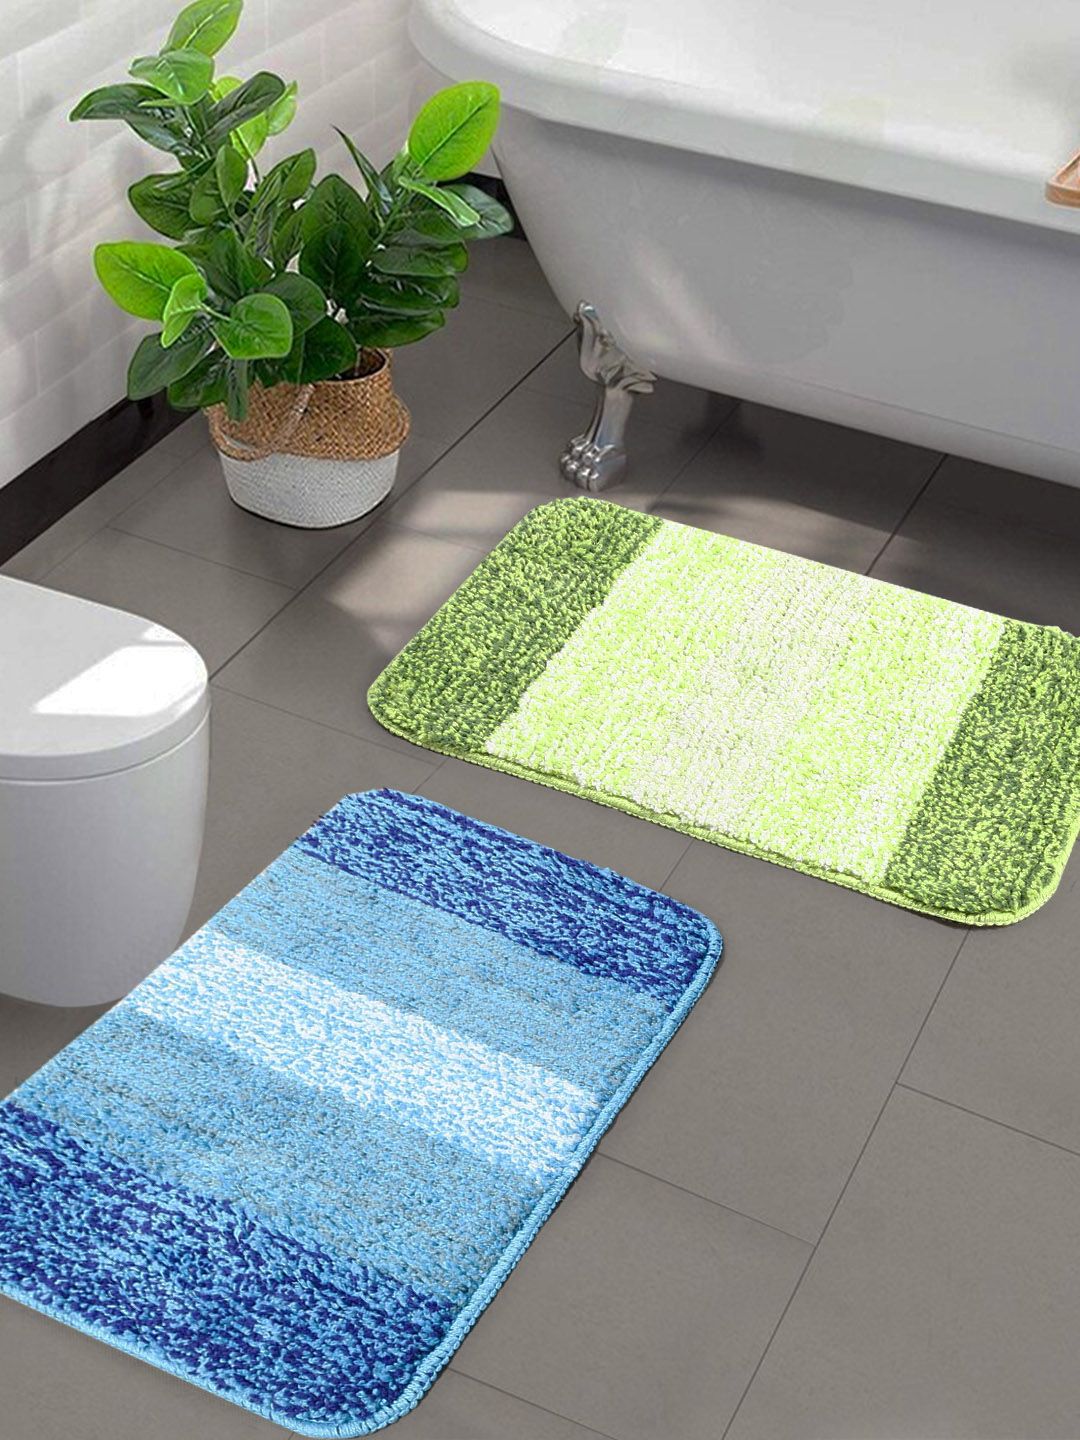 Saral Home Set Of 2 Striped Anti-Skid Bath Mats Price in India